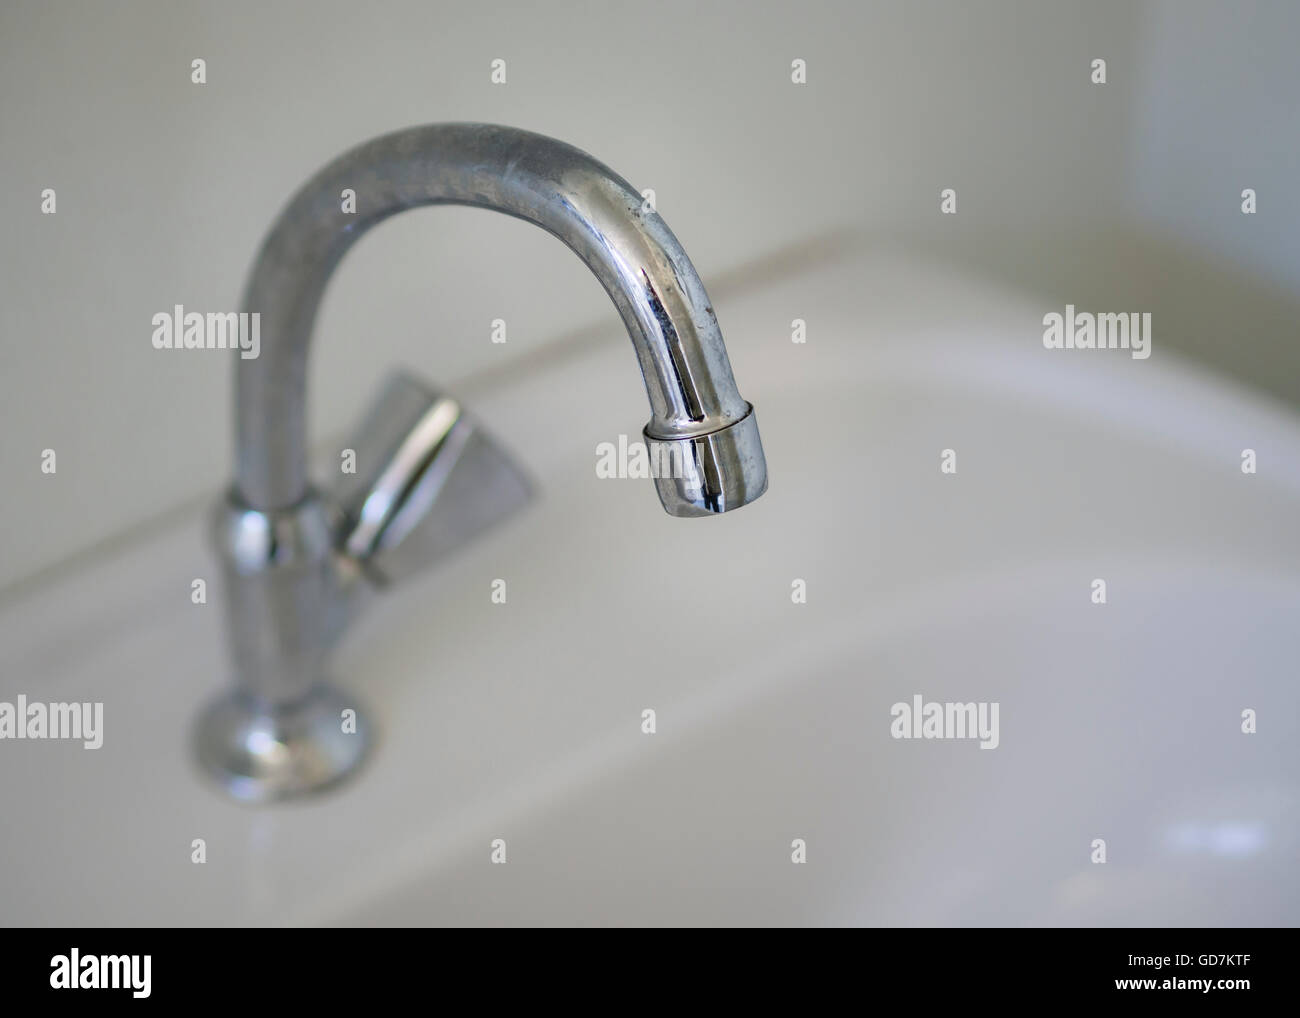 White porcelain lavatory with a simple, chromed faucet Stock Photo